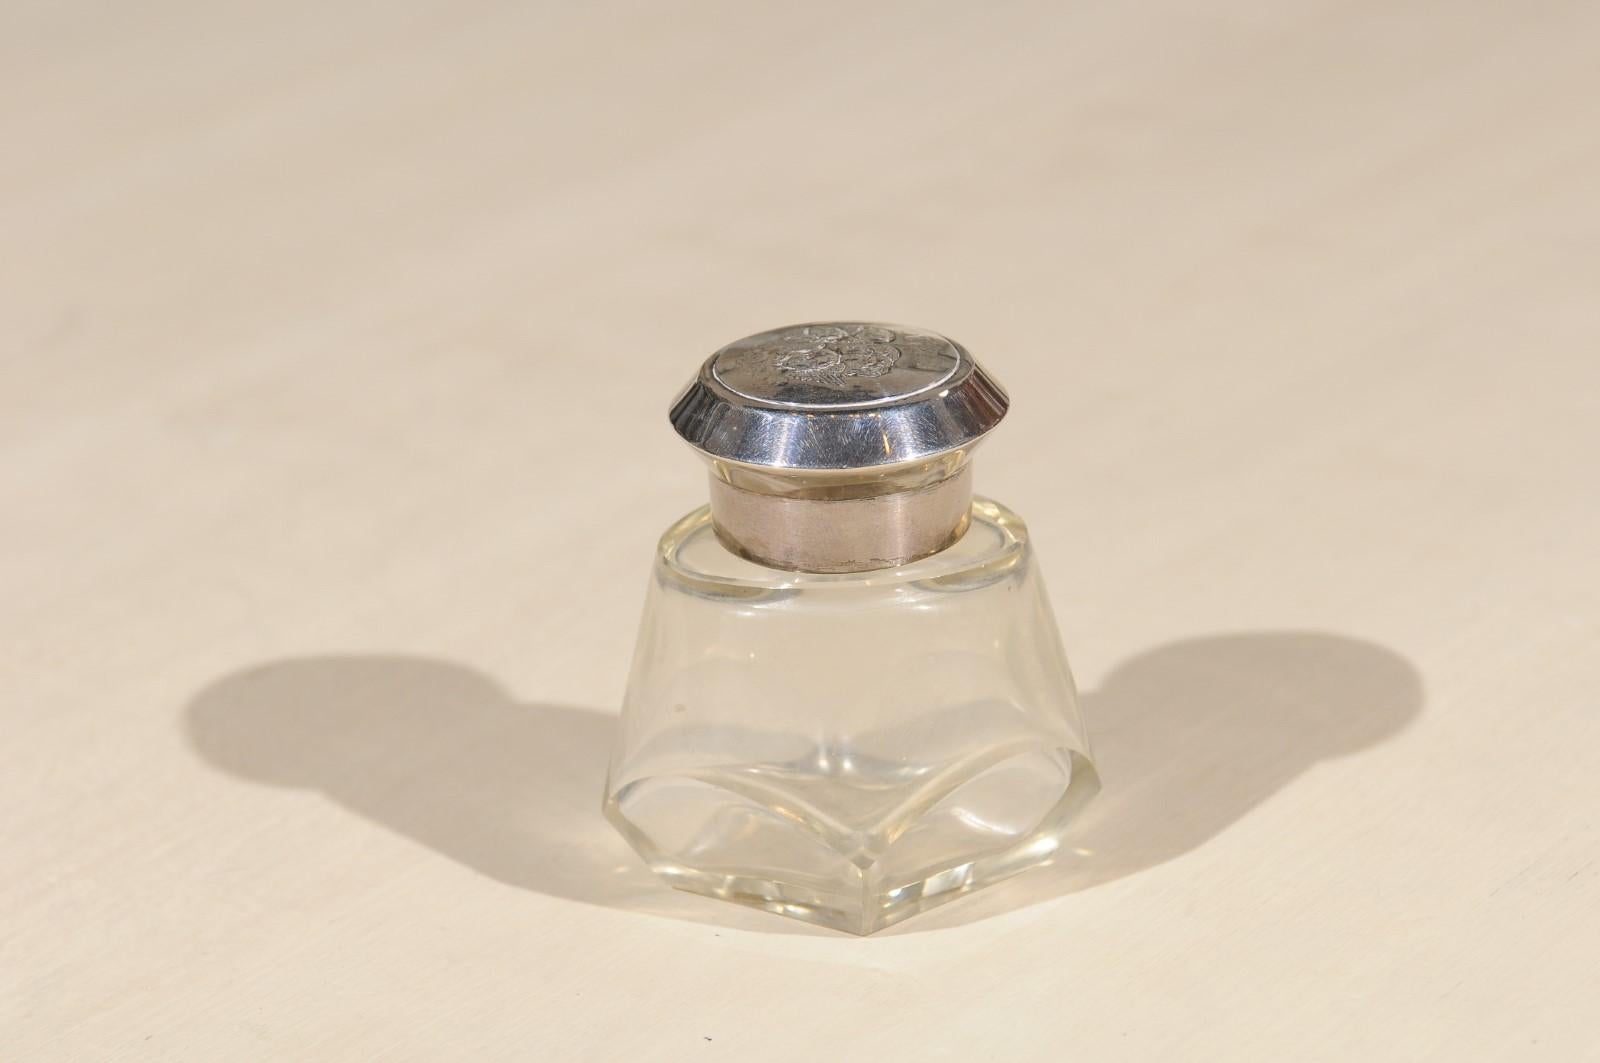 An English crystal toiletry bottle from Birmingham circa 1924, with silver lid. Born in the West Midlands region of England during the early years of the 20th century, this lovely toiletry bottle features a petite crystal body accented with a silver